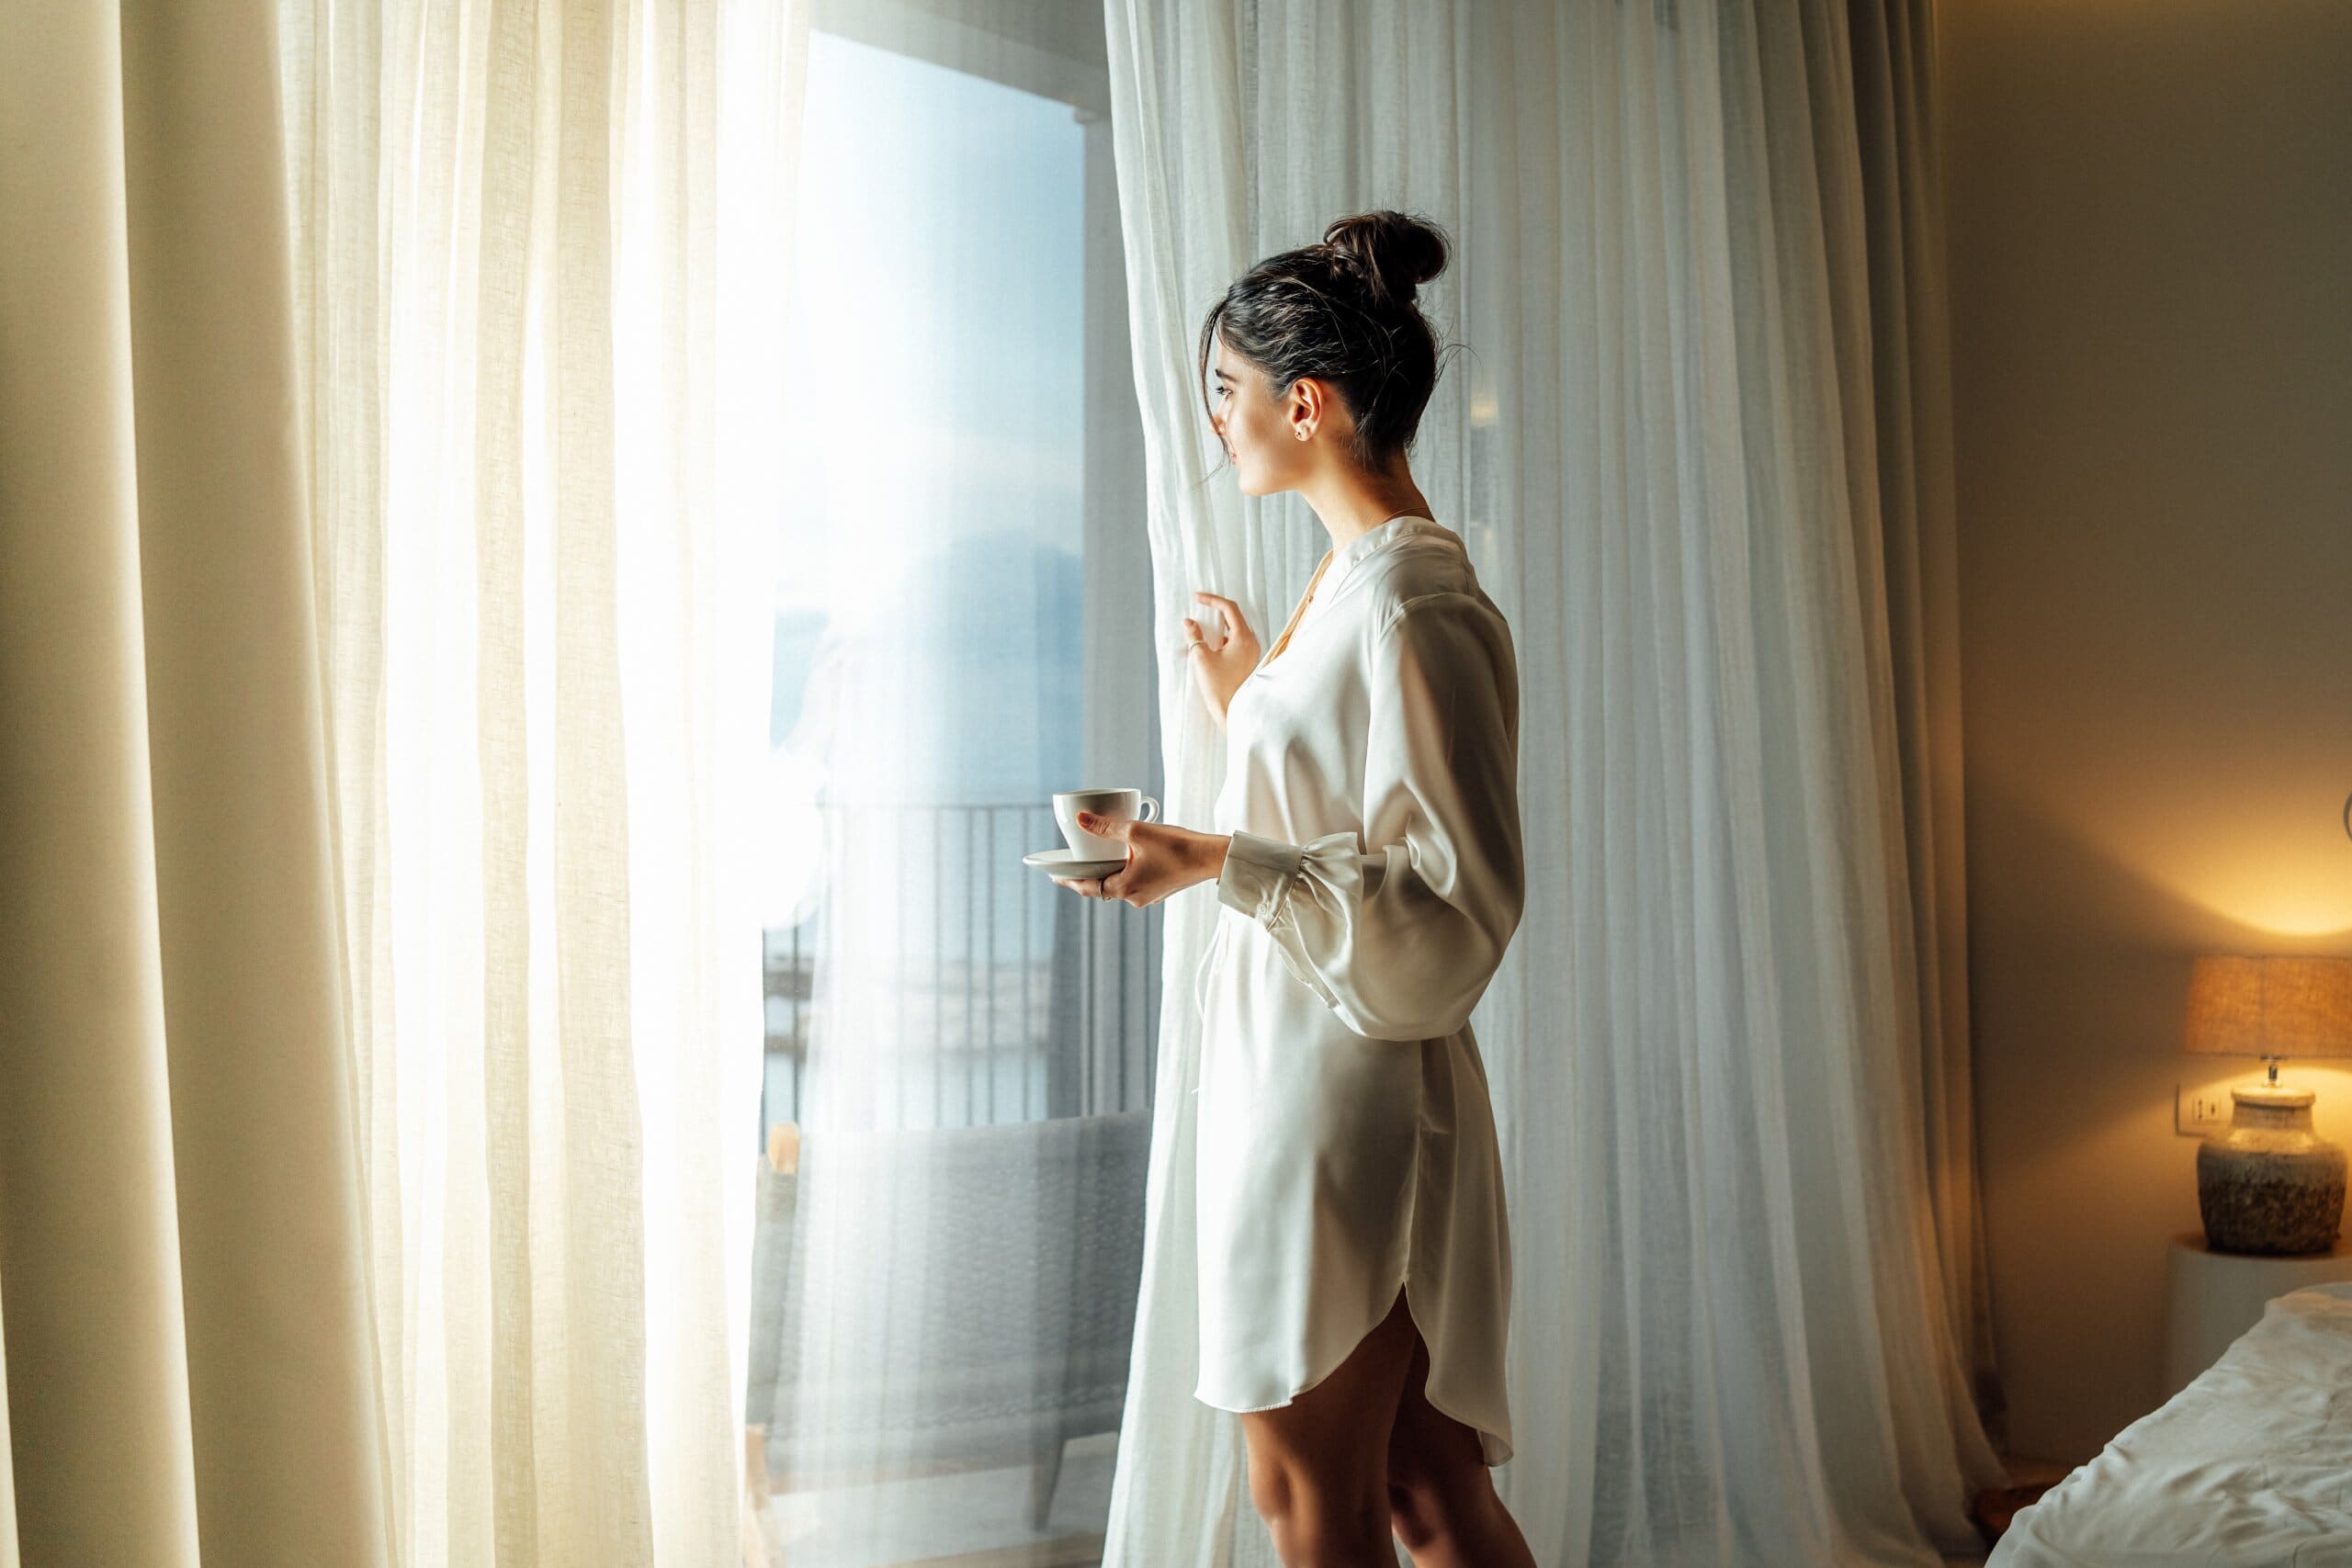 Young woman wearing white bathrobe opening curtains in luxury hotel room and enjoying sun in the morning while having her cup of coffee.